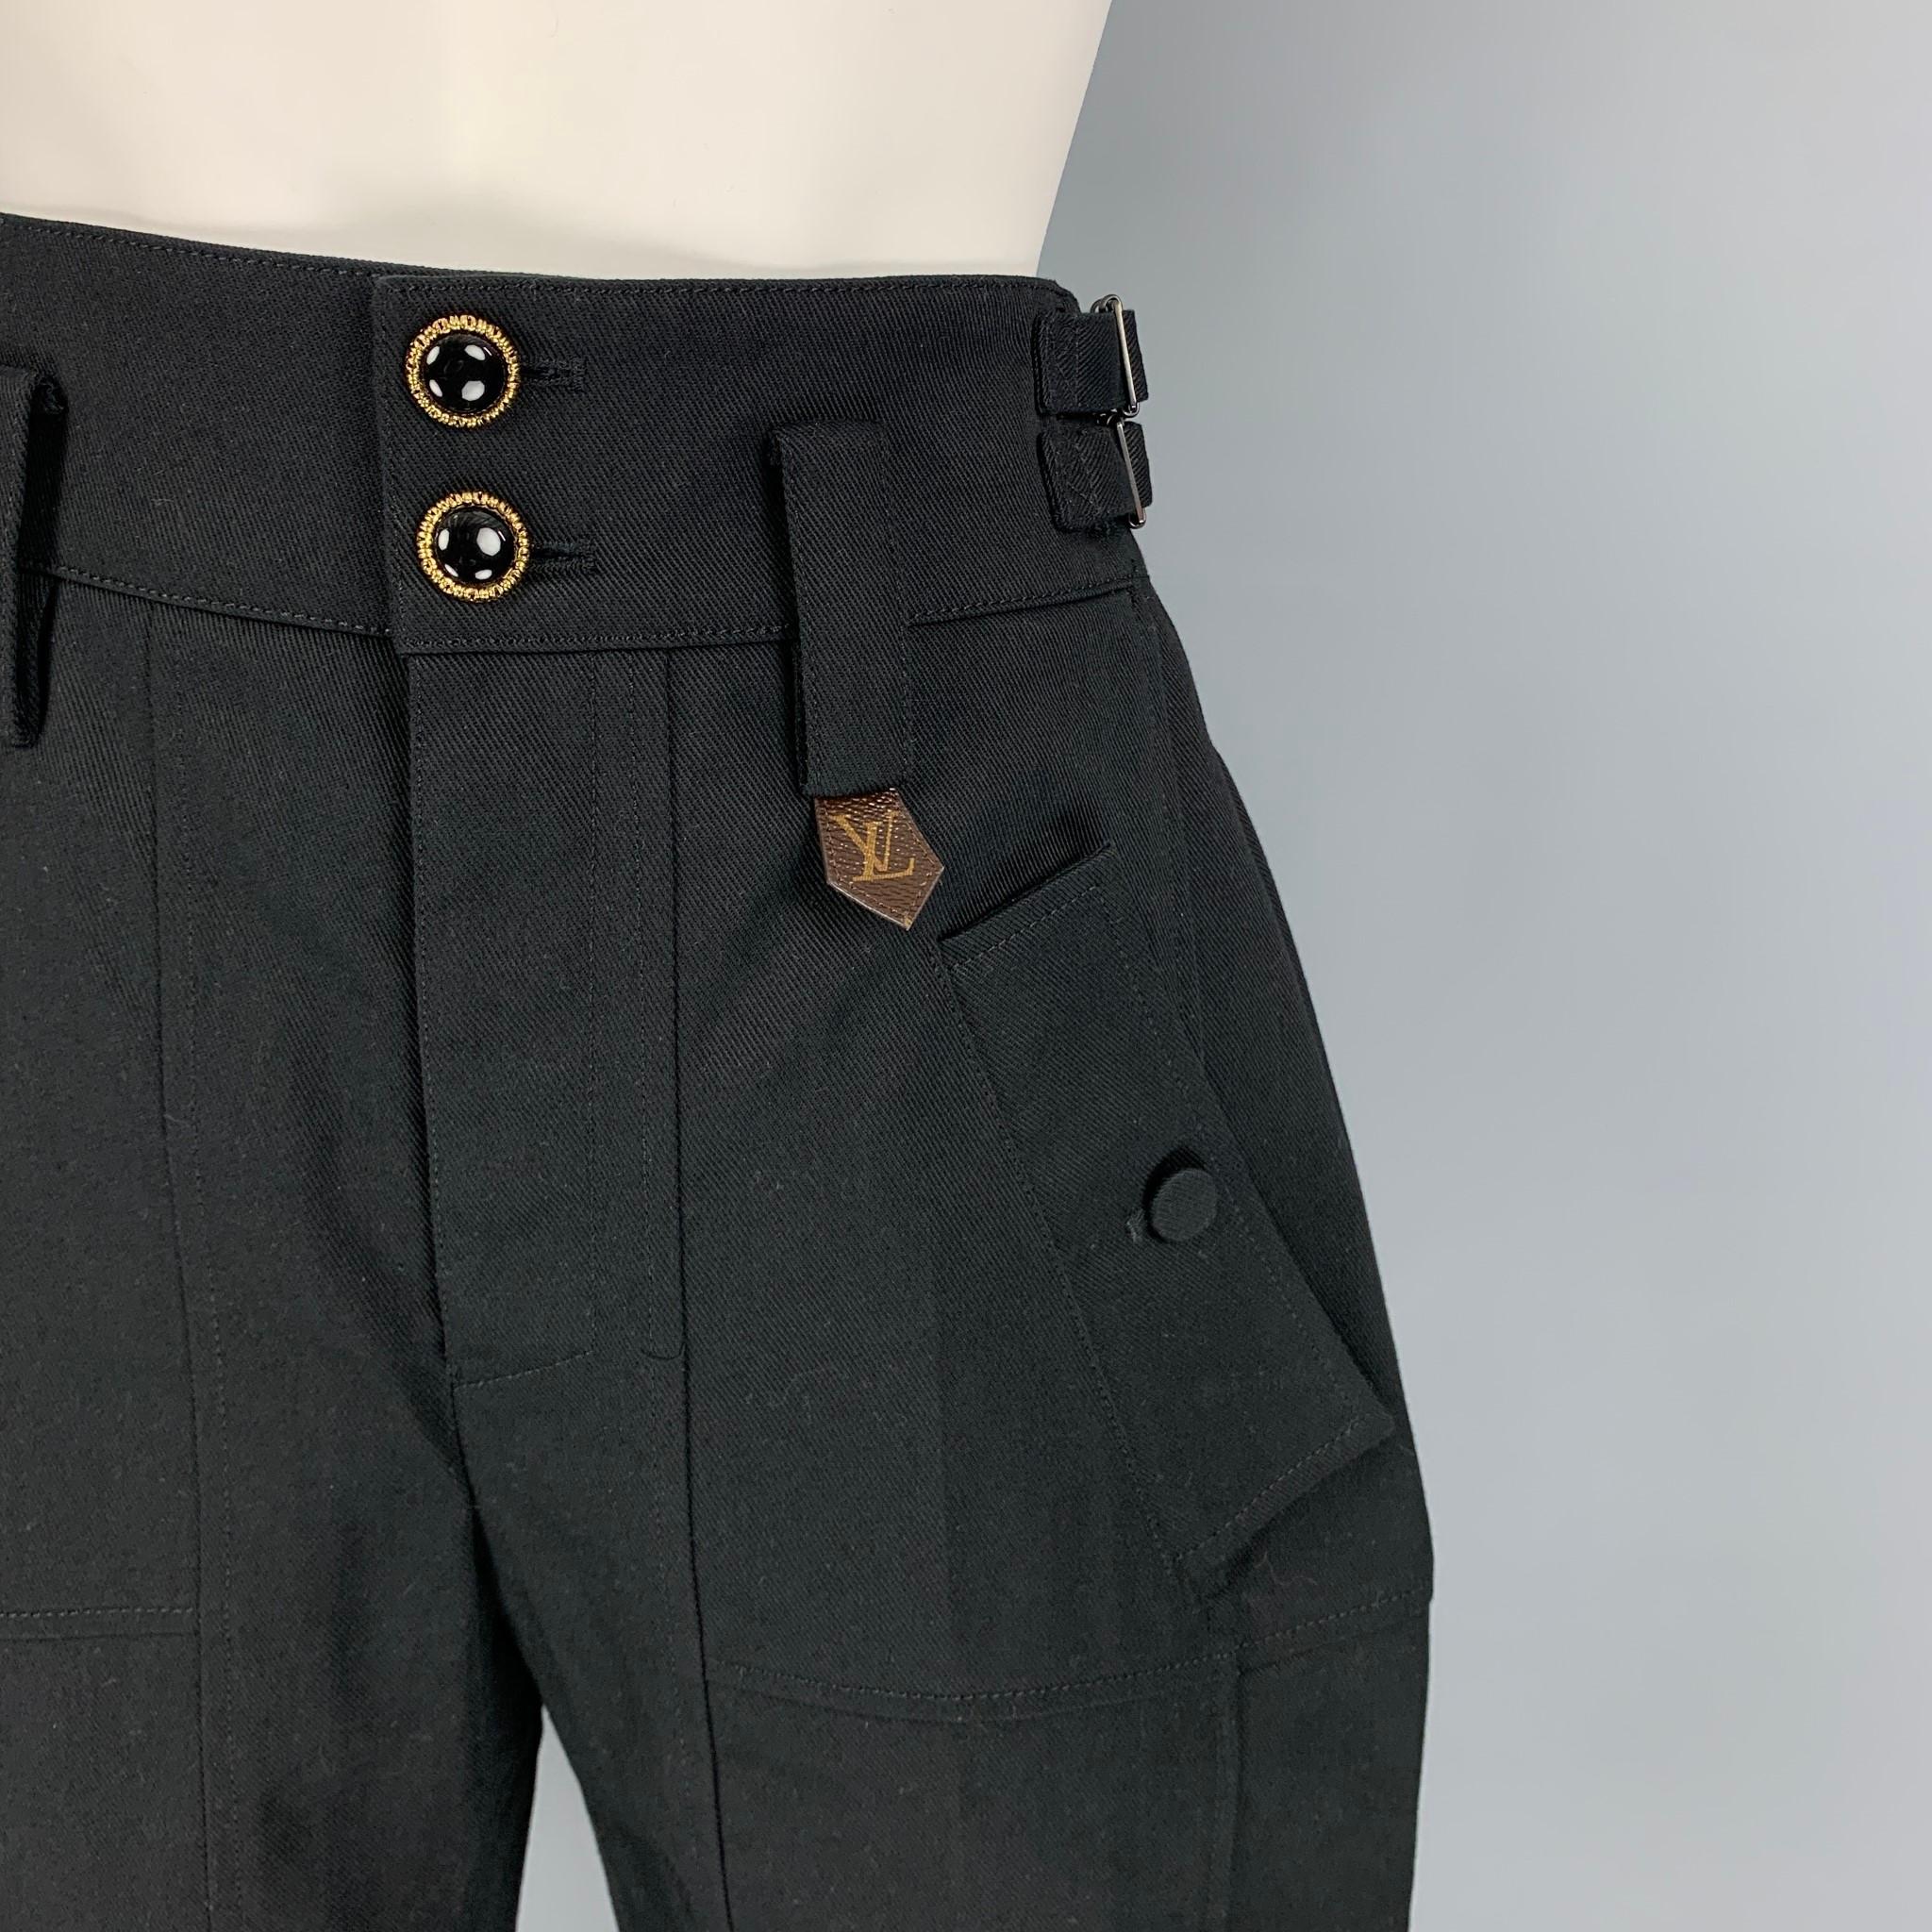 LOUIS VUITTON pants comes in a black cotton / polyester featuring a bermuda style, logo canvas trim, high waisted, adjustable side tabs, front & back, and a button fly closure. Made in Italy. 

New with tags. 
Marked: 34
Original Retail Price: